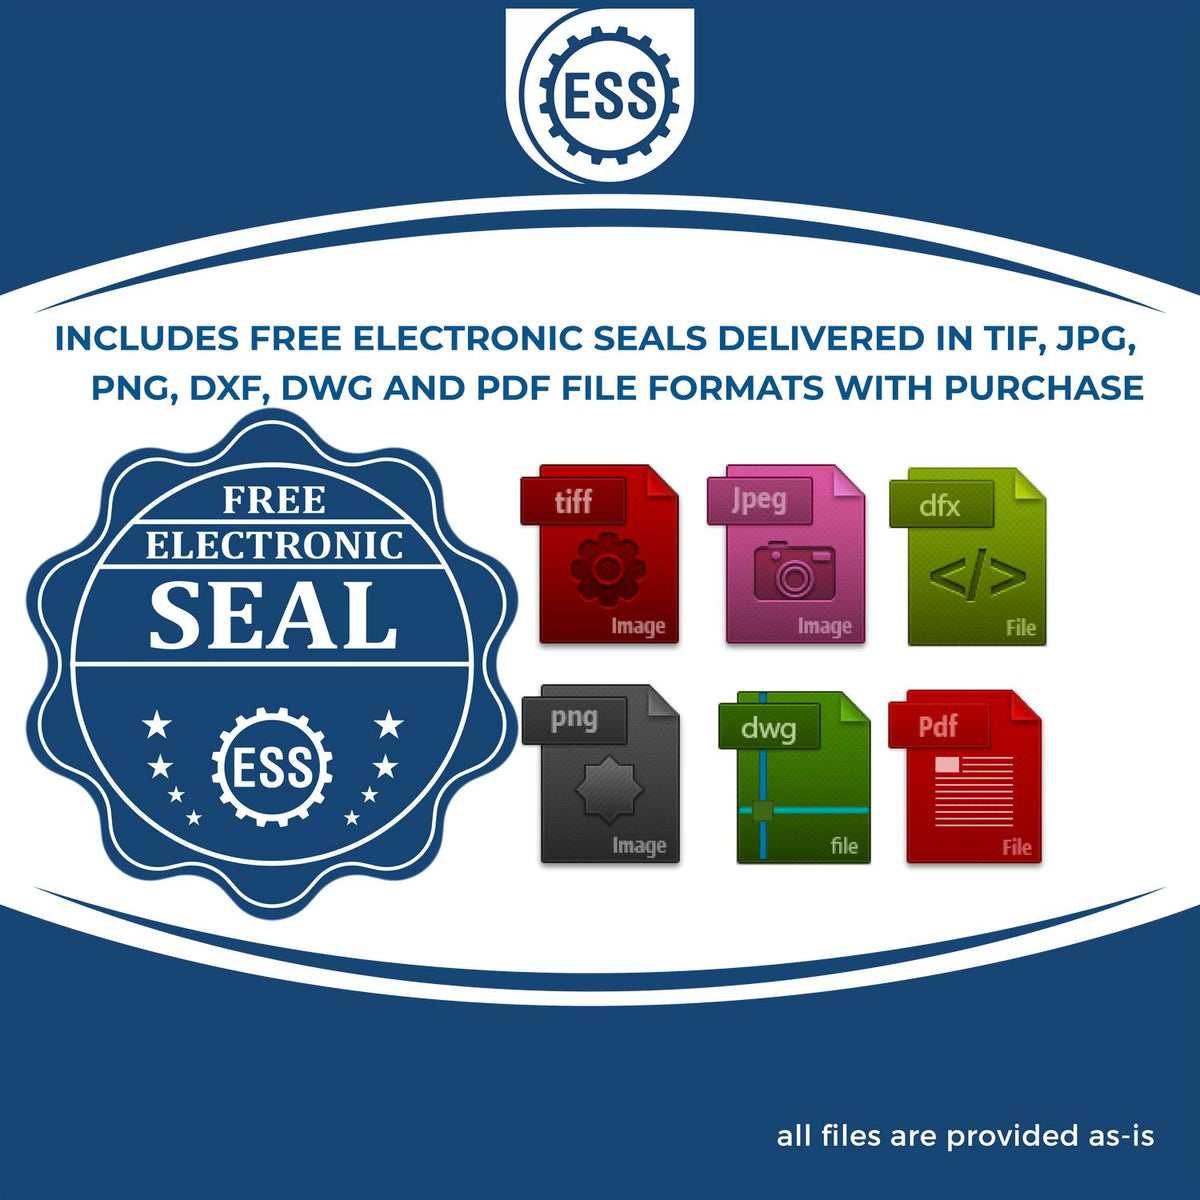 An infographic for the free electronic seal for the Self-Inking North Carolina Landscape Architect Stamp illustrating the different file type icons such as DXF, DWG, TIF, JPG and PNG.